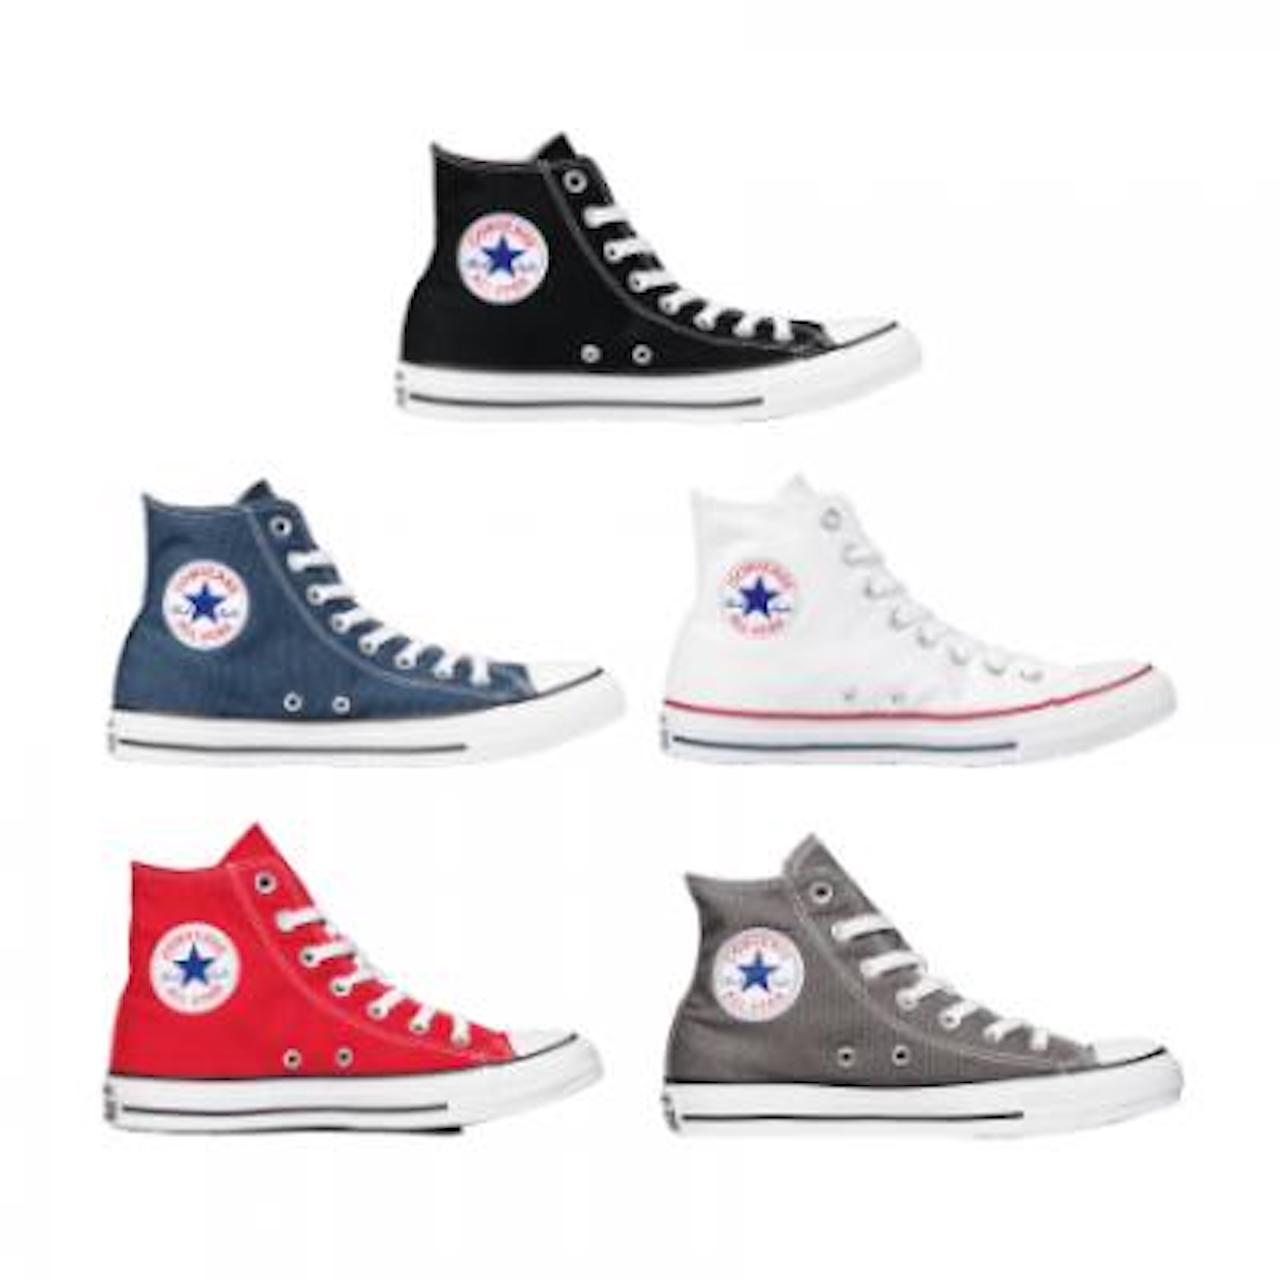 Kemiker kasseapparat linned Converse Branded shoes wholesale - Fashion STOCK wholesale - stock clothes  deals in bulk of Dutch and European brands